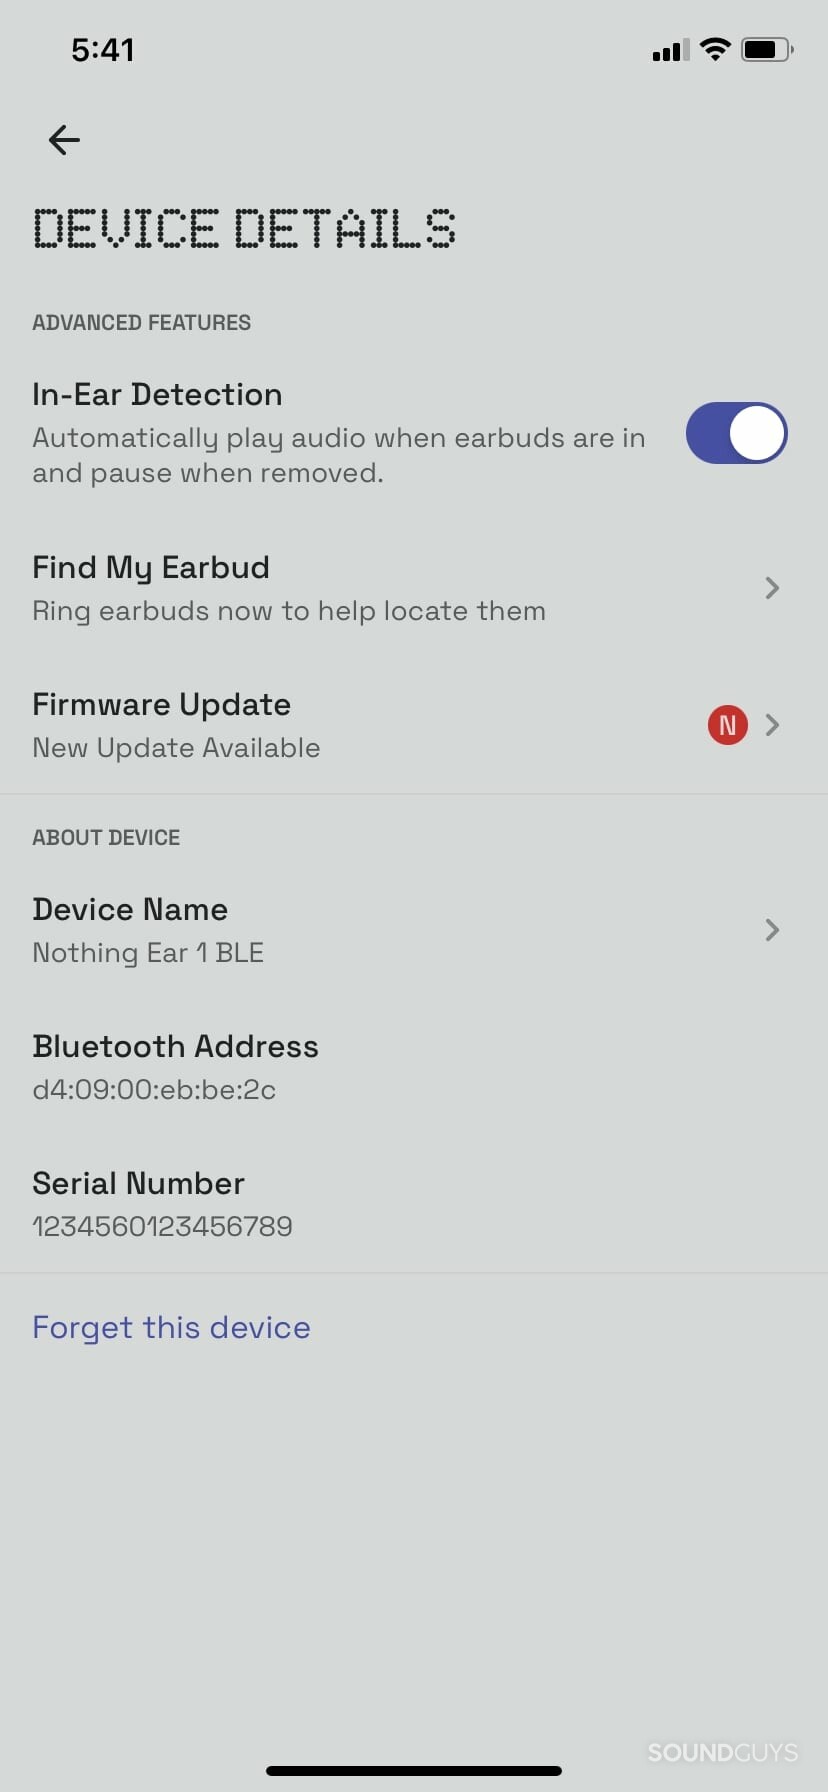 A screenshot of the Nothing Ear 1 app details tab.